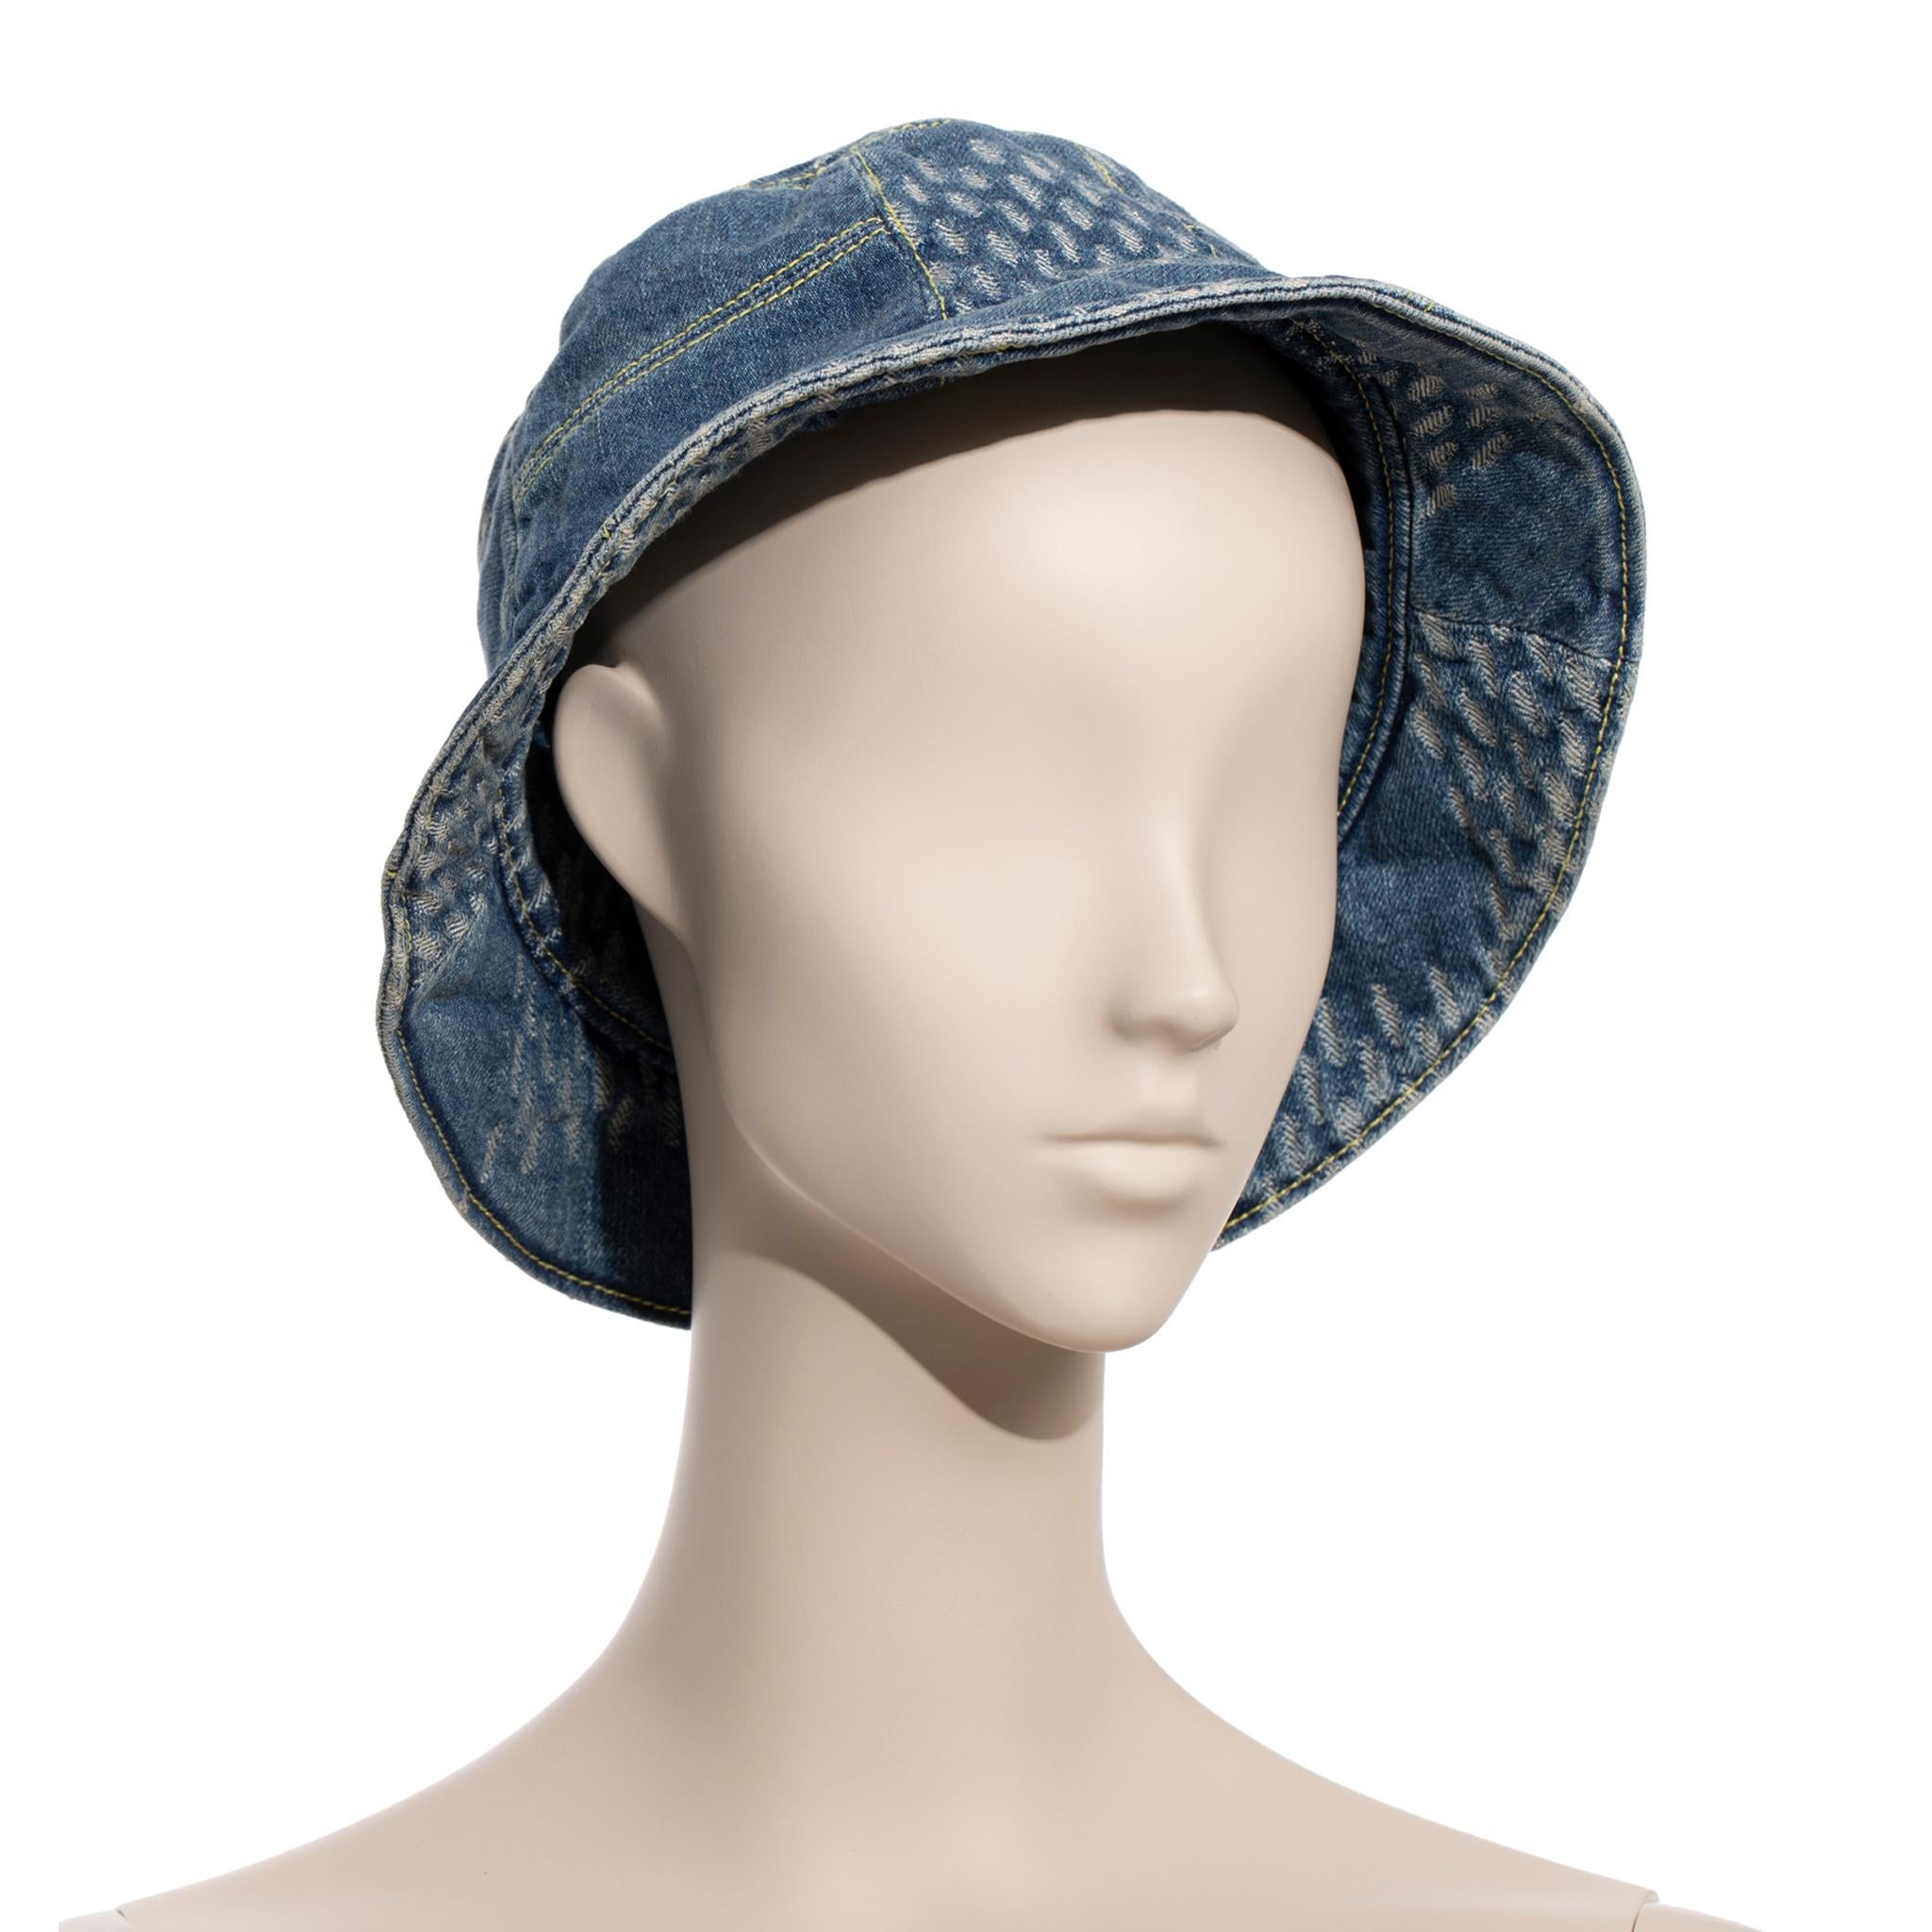 This limited edition Louis Vuitton x Nigo bucket hats is crafted from washed denim for a classic look that never goes out of style. Enjoy the stylish new take on an iconic silhouette while you stay protected from the sun.

Brand: Louis Vuitton x